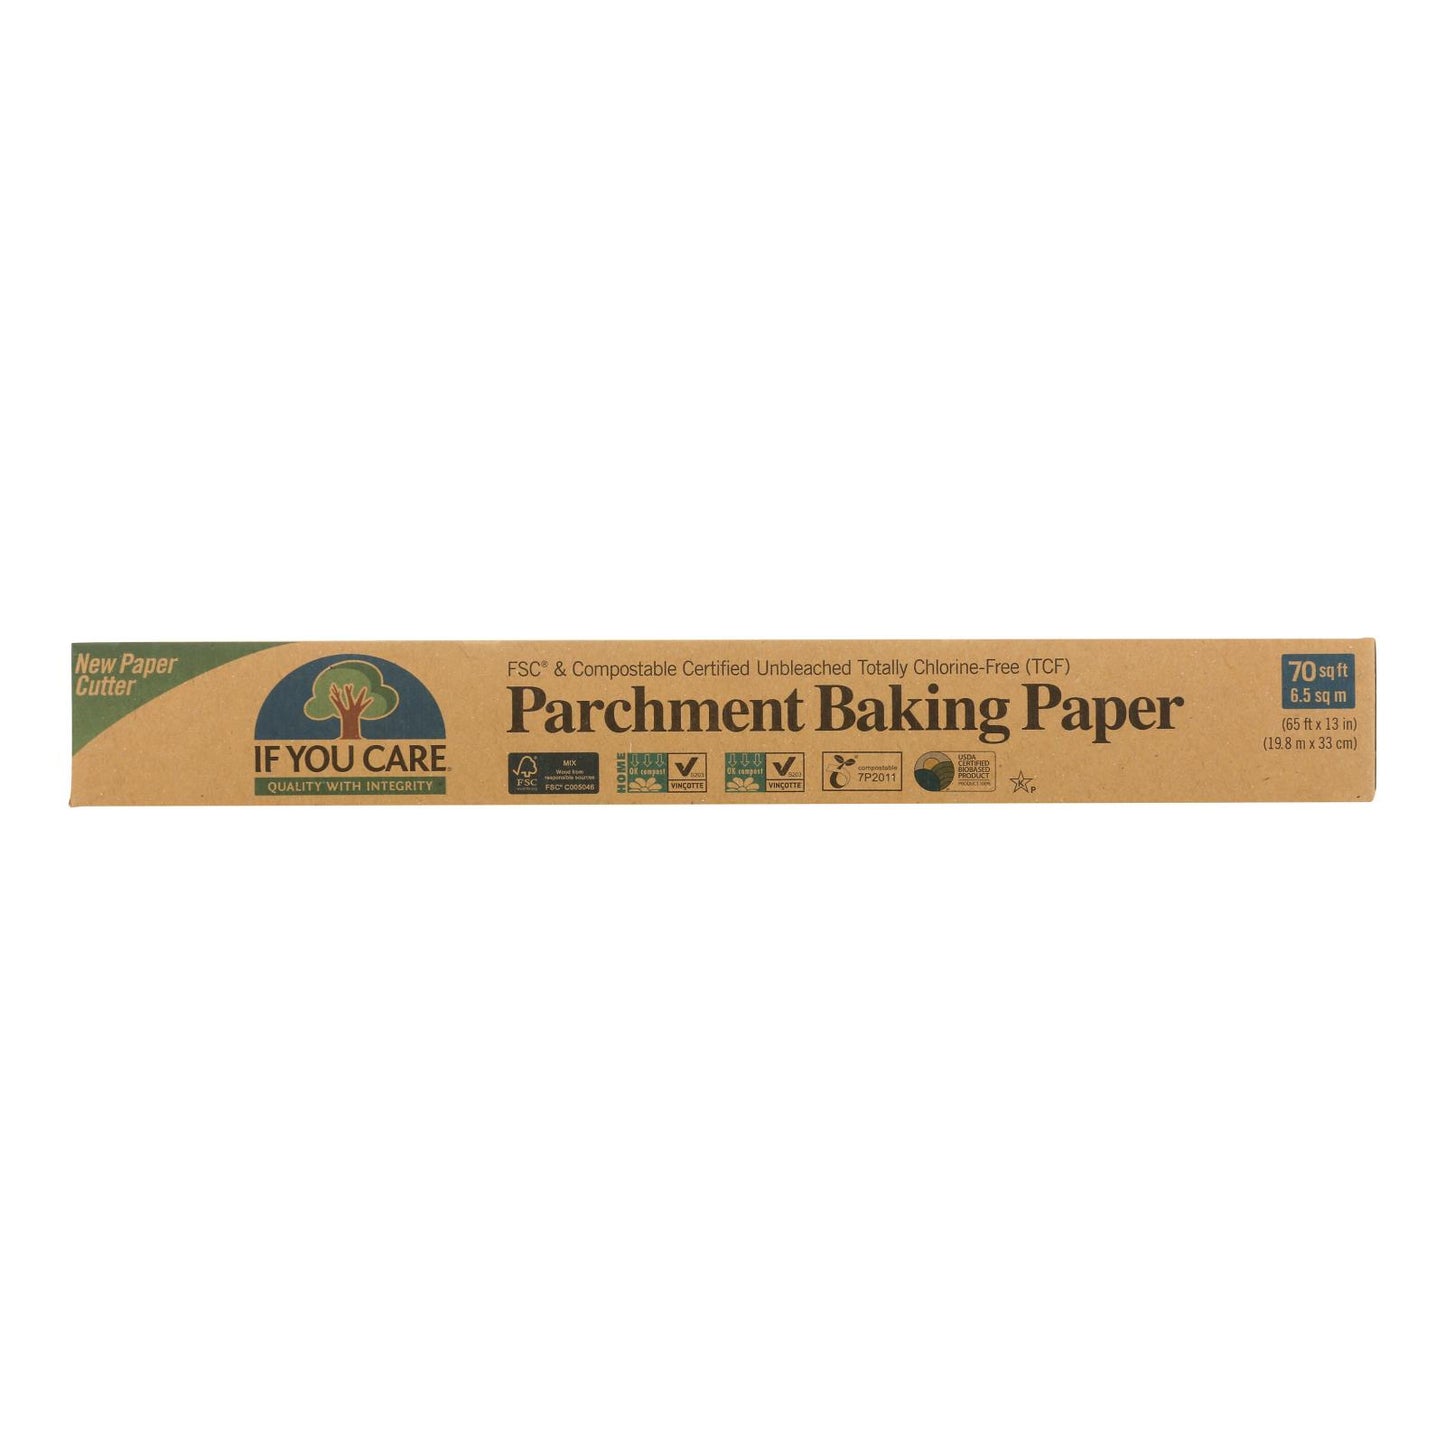 If You Care Parchment Paper - Case Of 12 - 70 Sq Ft Rolls